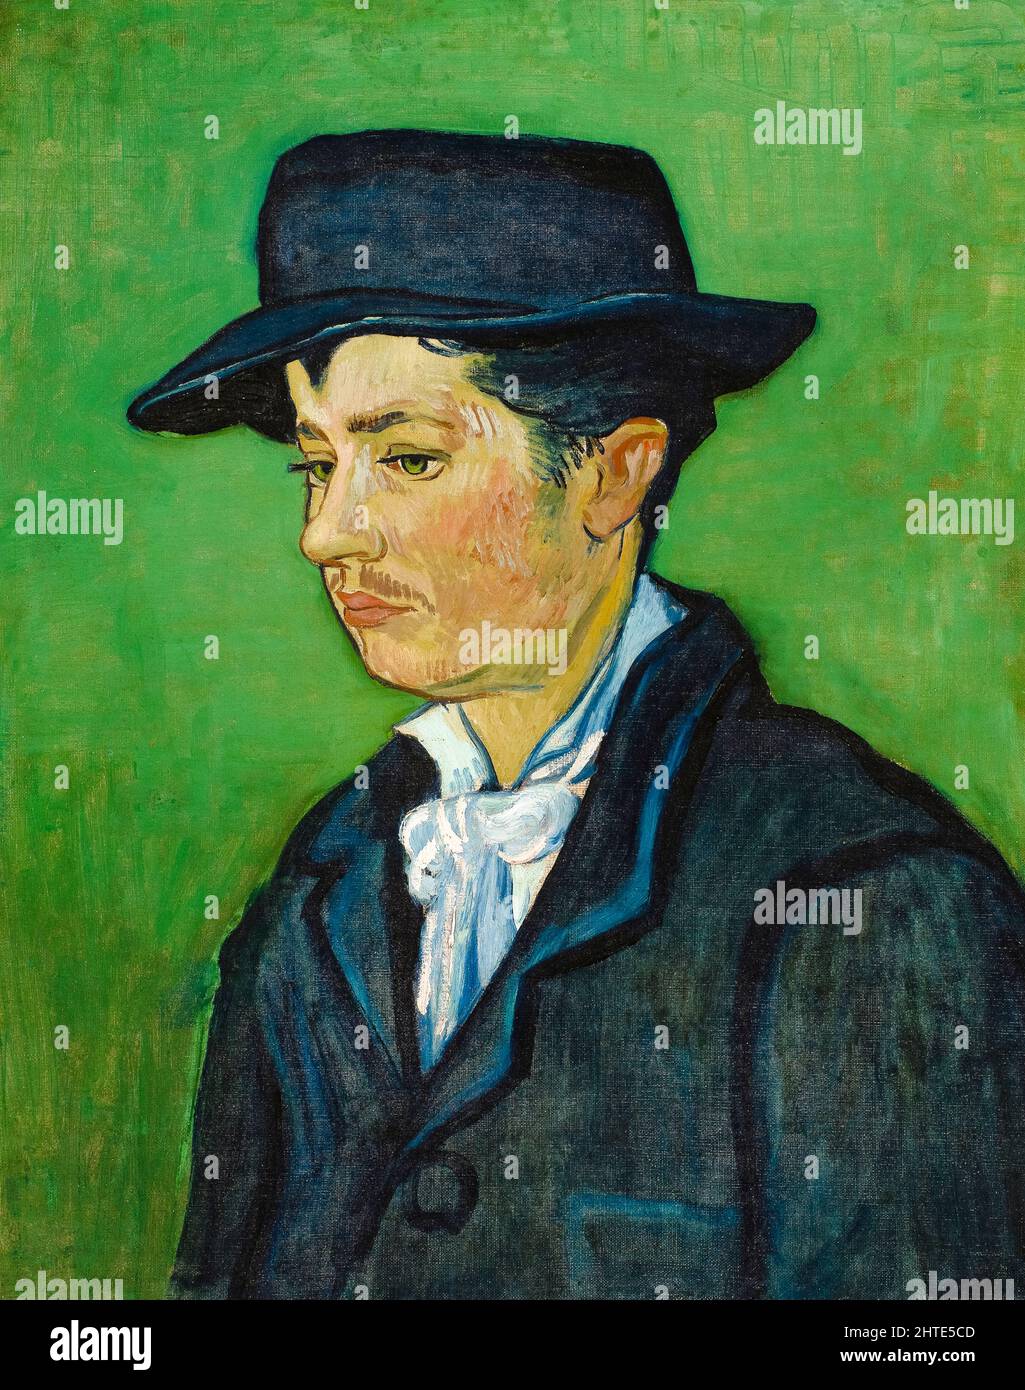 Portrait of Armand Roulin, oil on canvas painting by Vincent van Gogh, 1888 Stock Photo